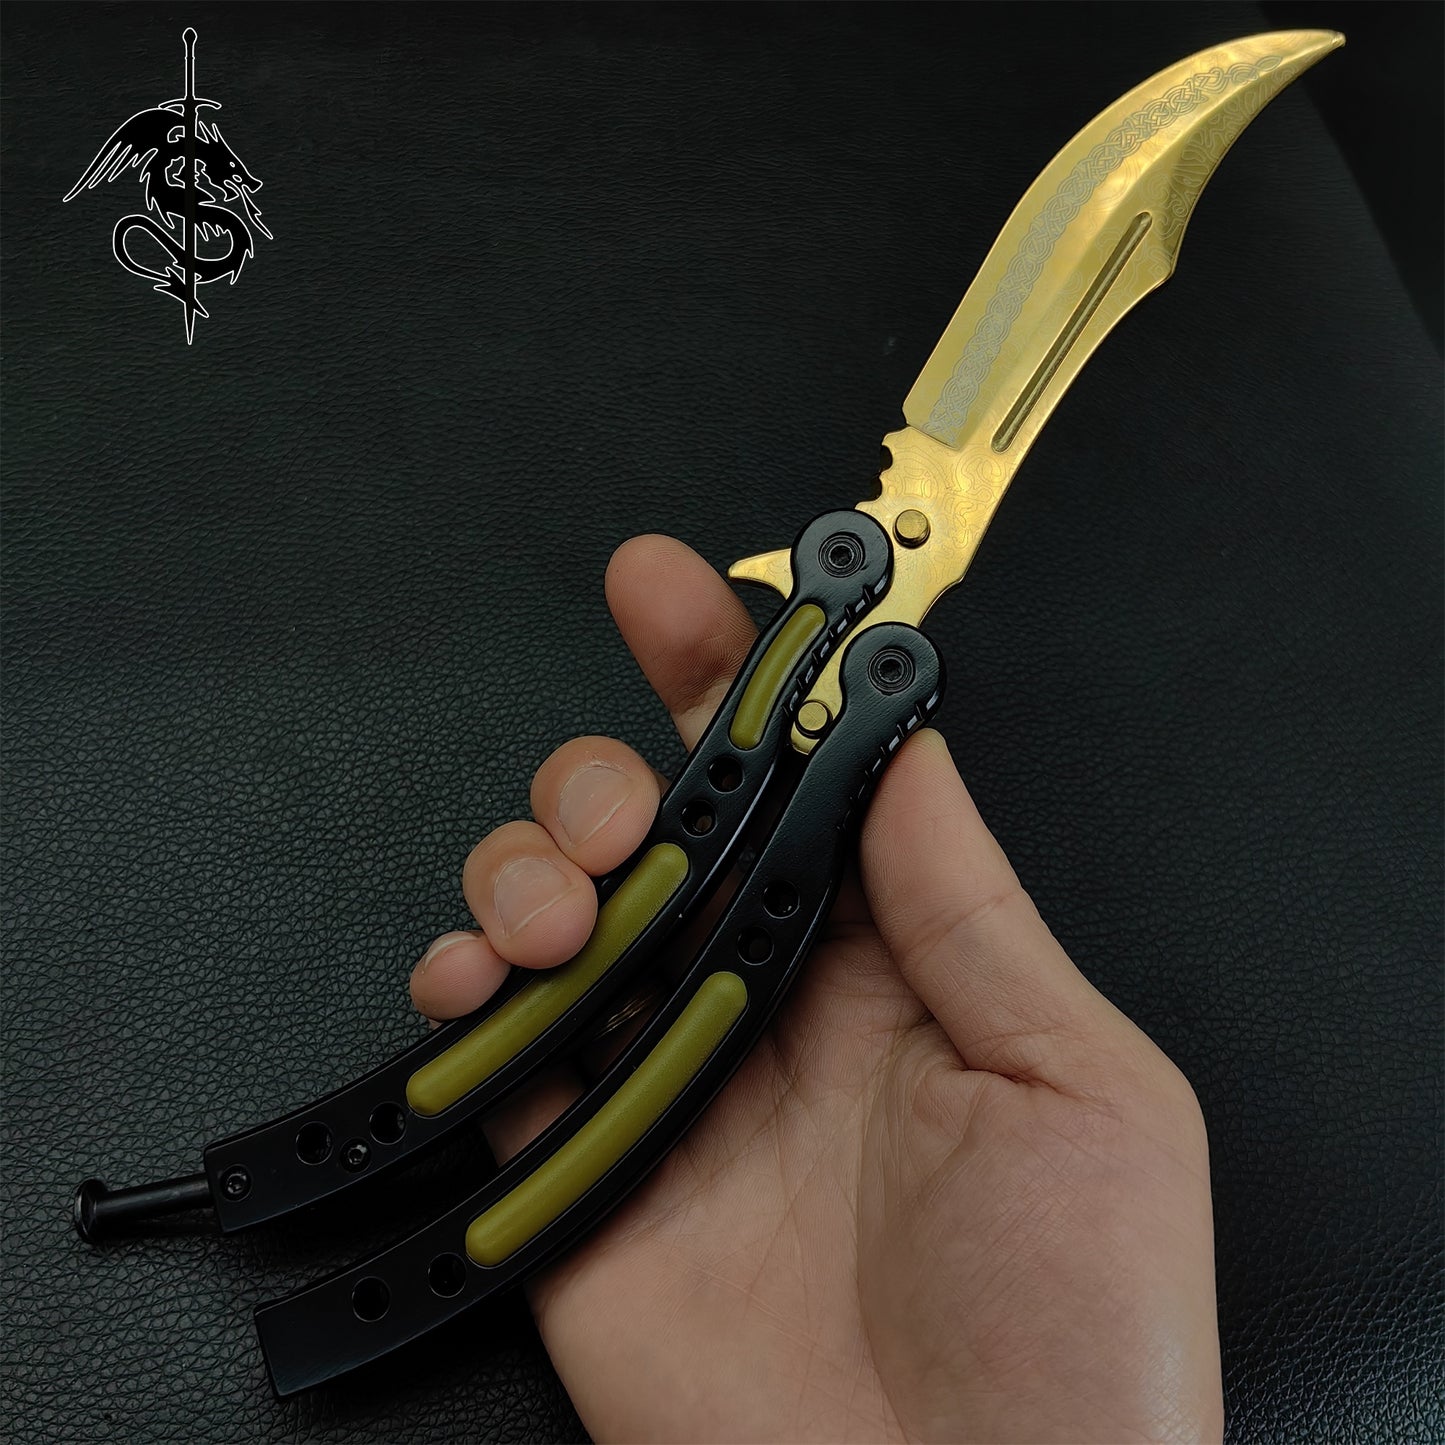 Lore Skin Karambit Trainer & Balisong Knife With Gift Case